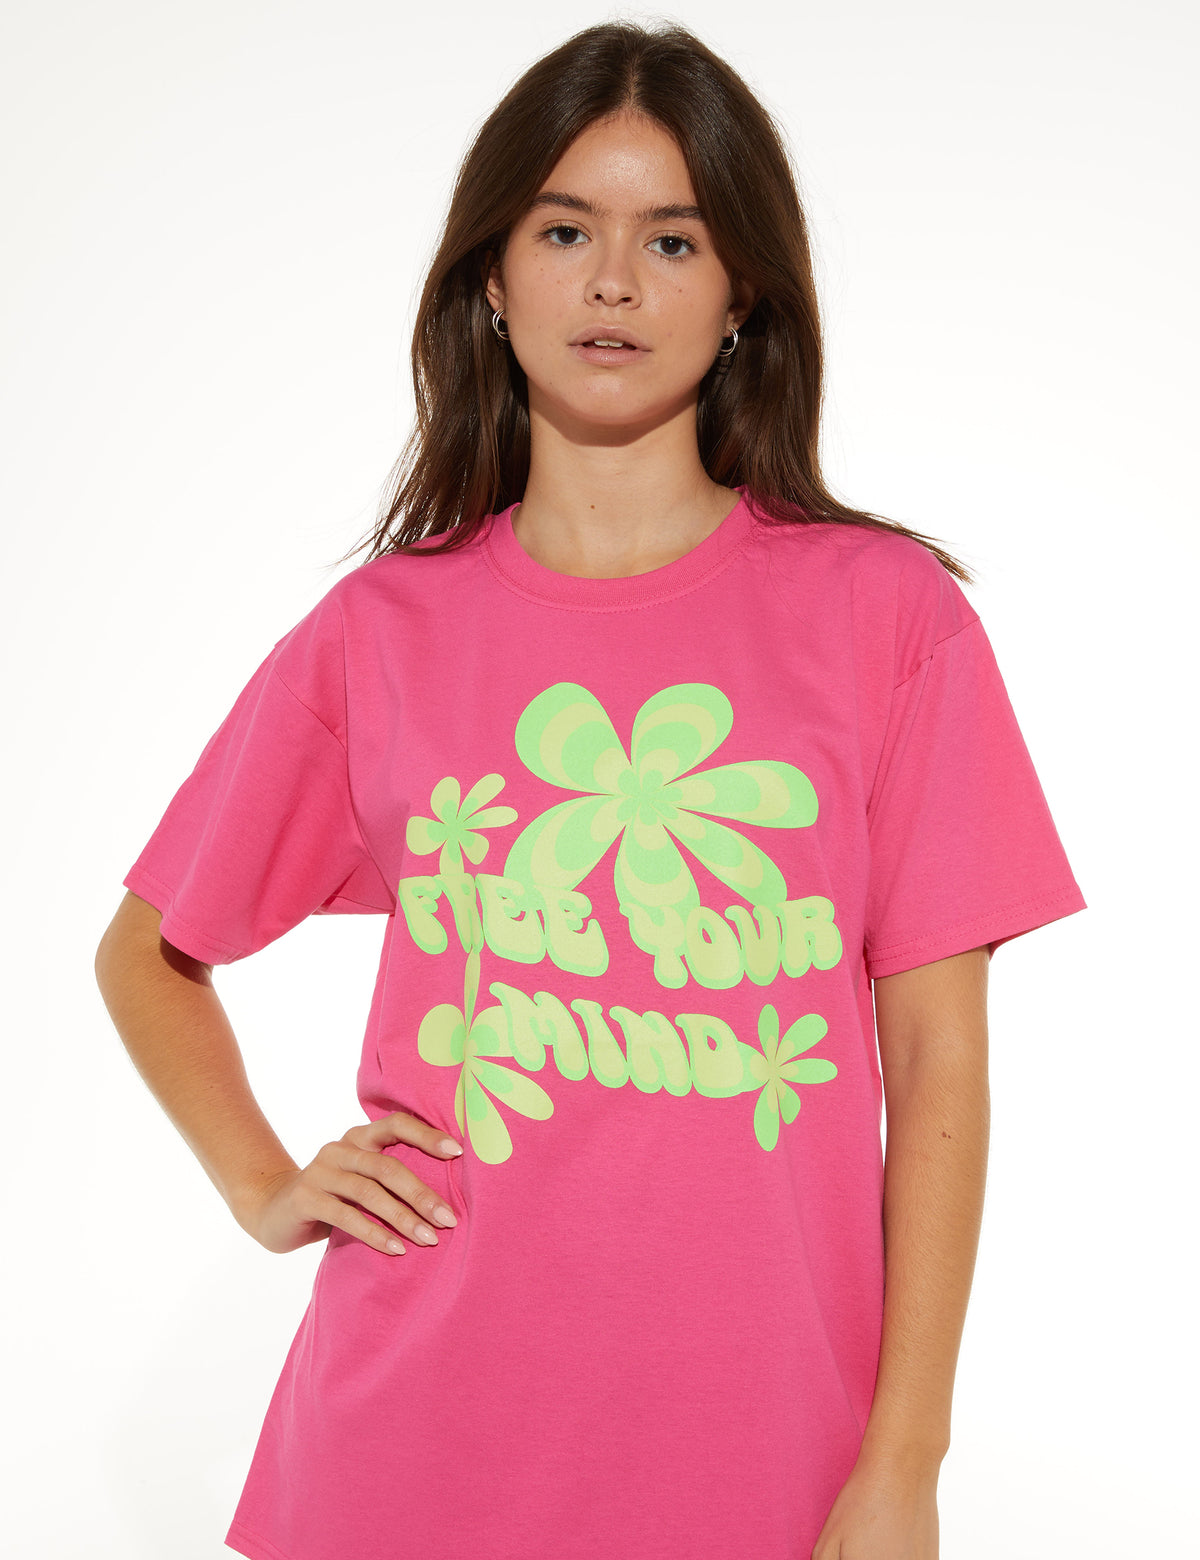 FREE YOUR MIND PINK TEE